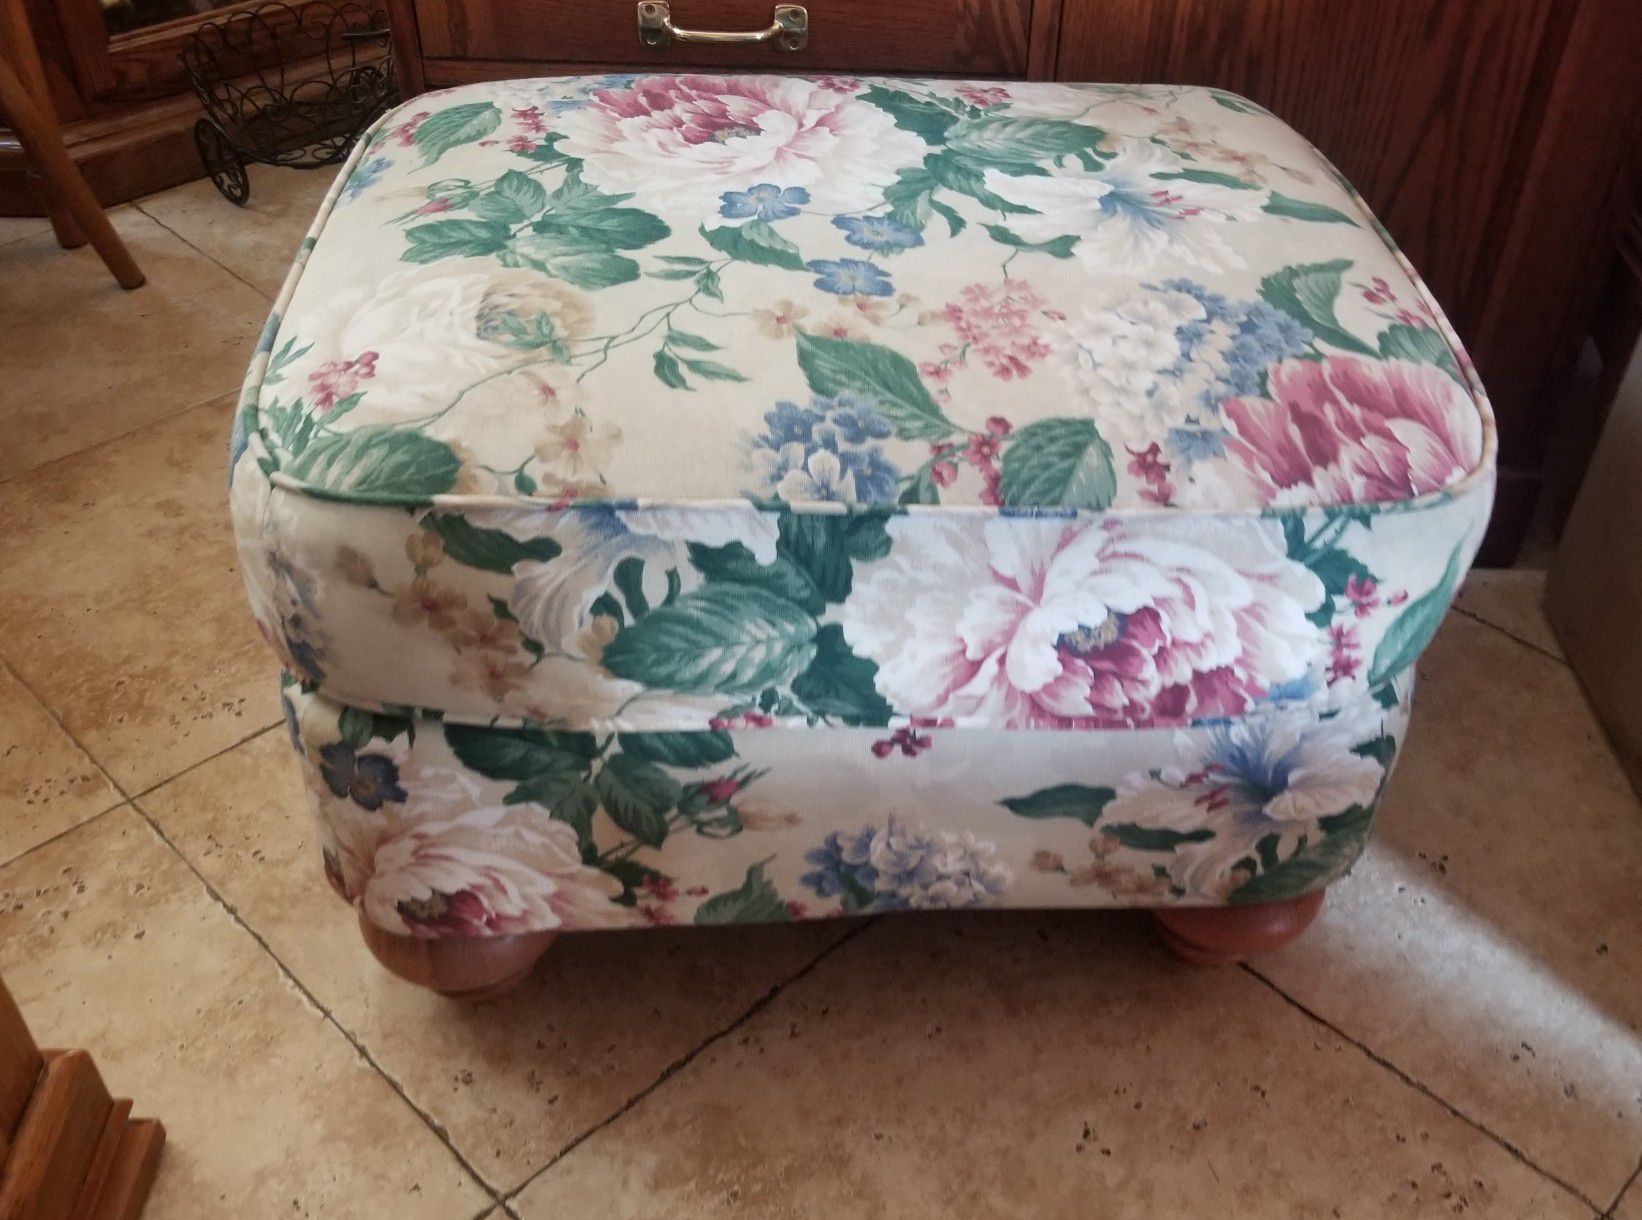 Genuine Broyhill Fontana Floral Ottoman in Excellent Condition.